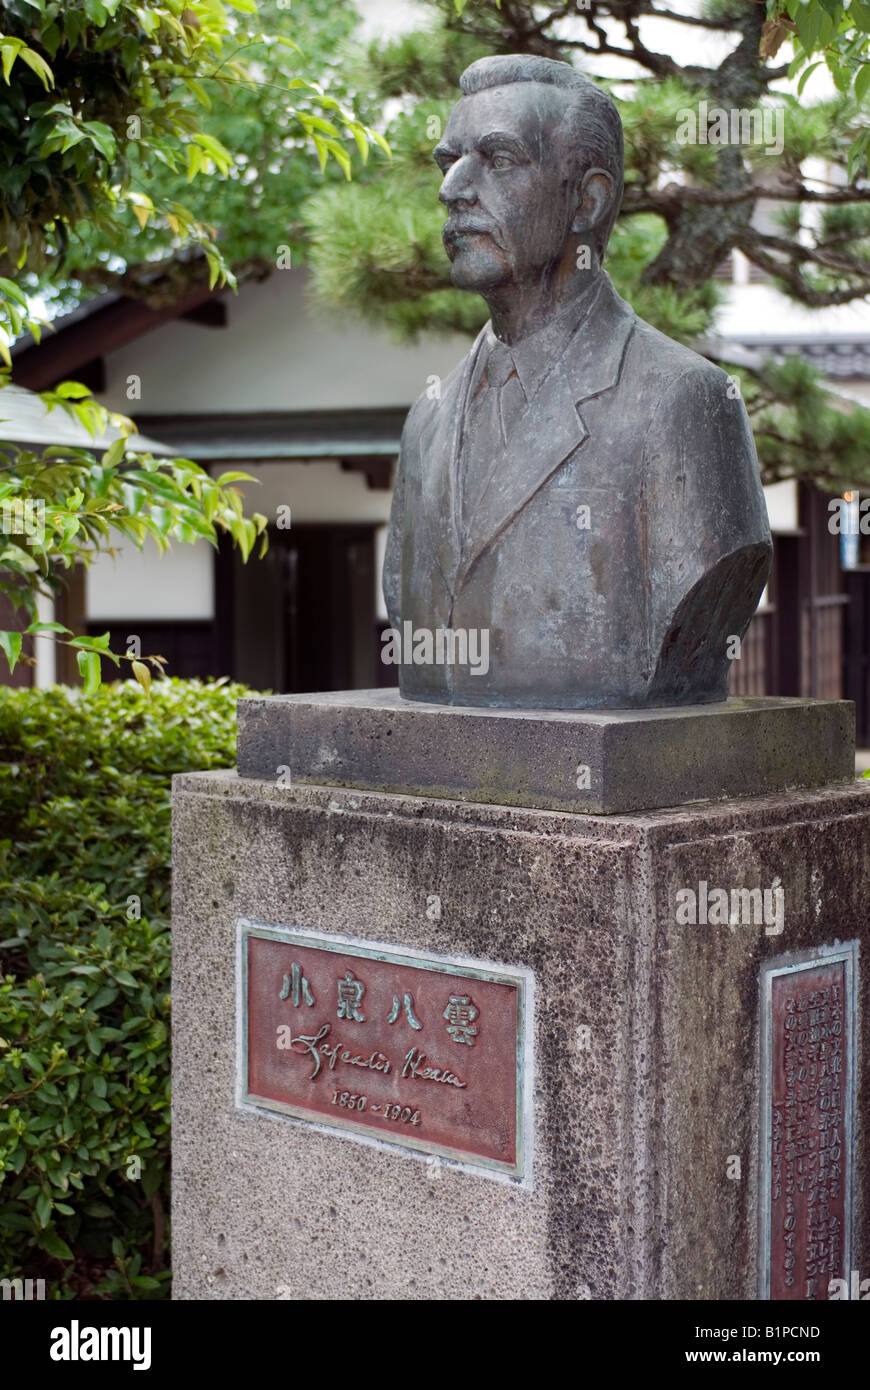 Bust statue of Lafcadio Hearn also known as Koizumi Yakumo near his house in Matsue Japan Stock Photo